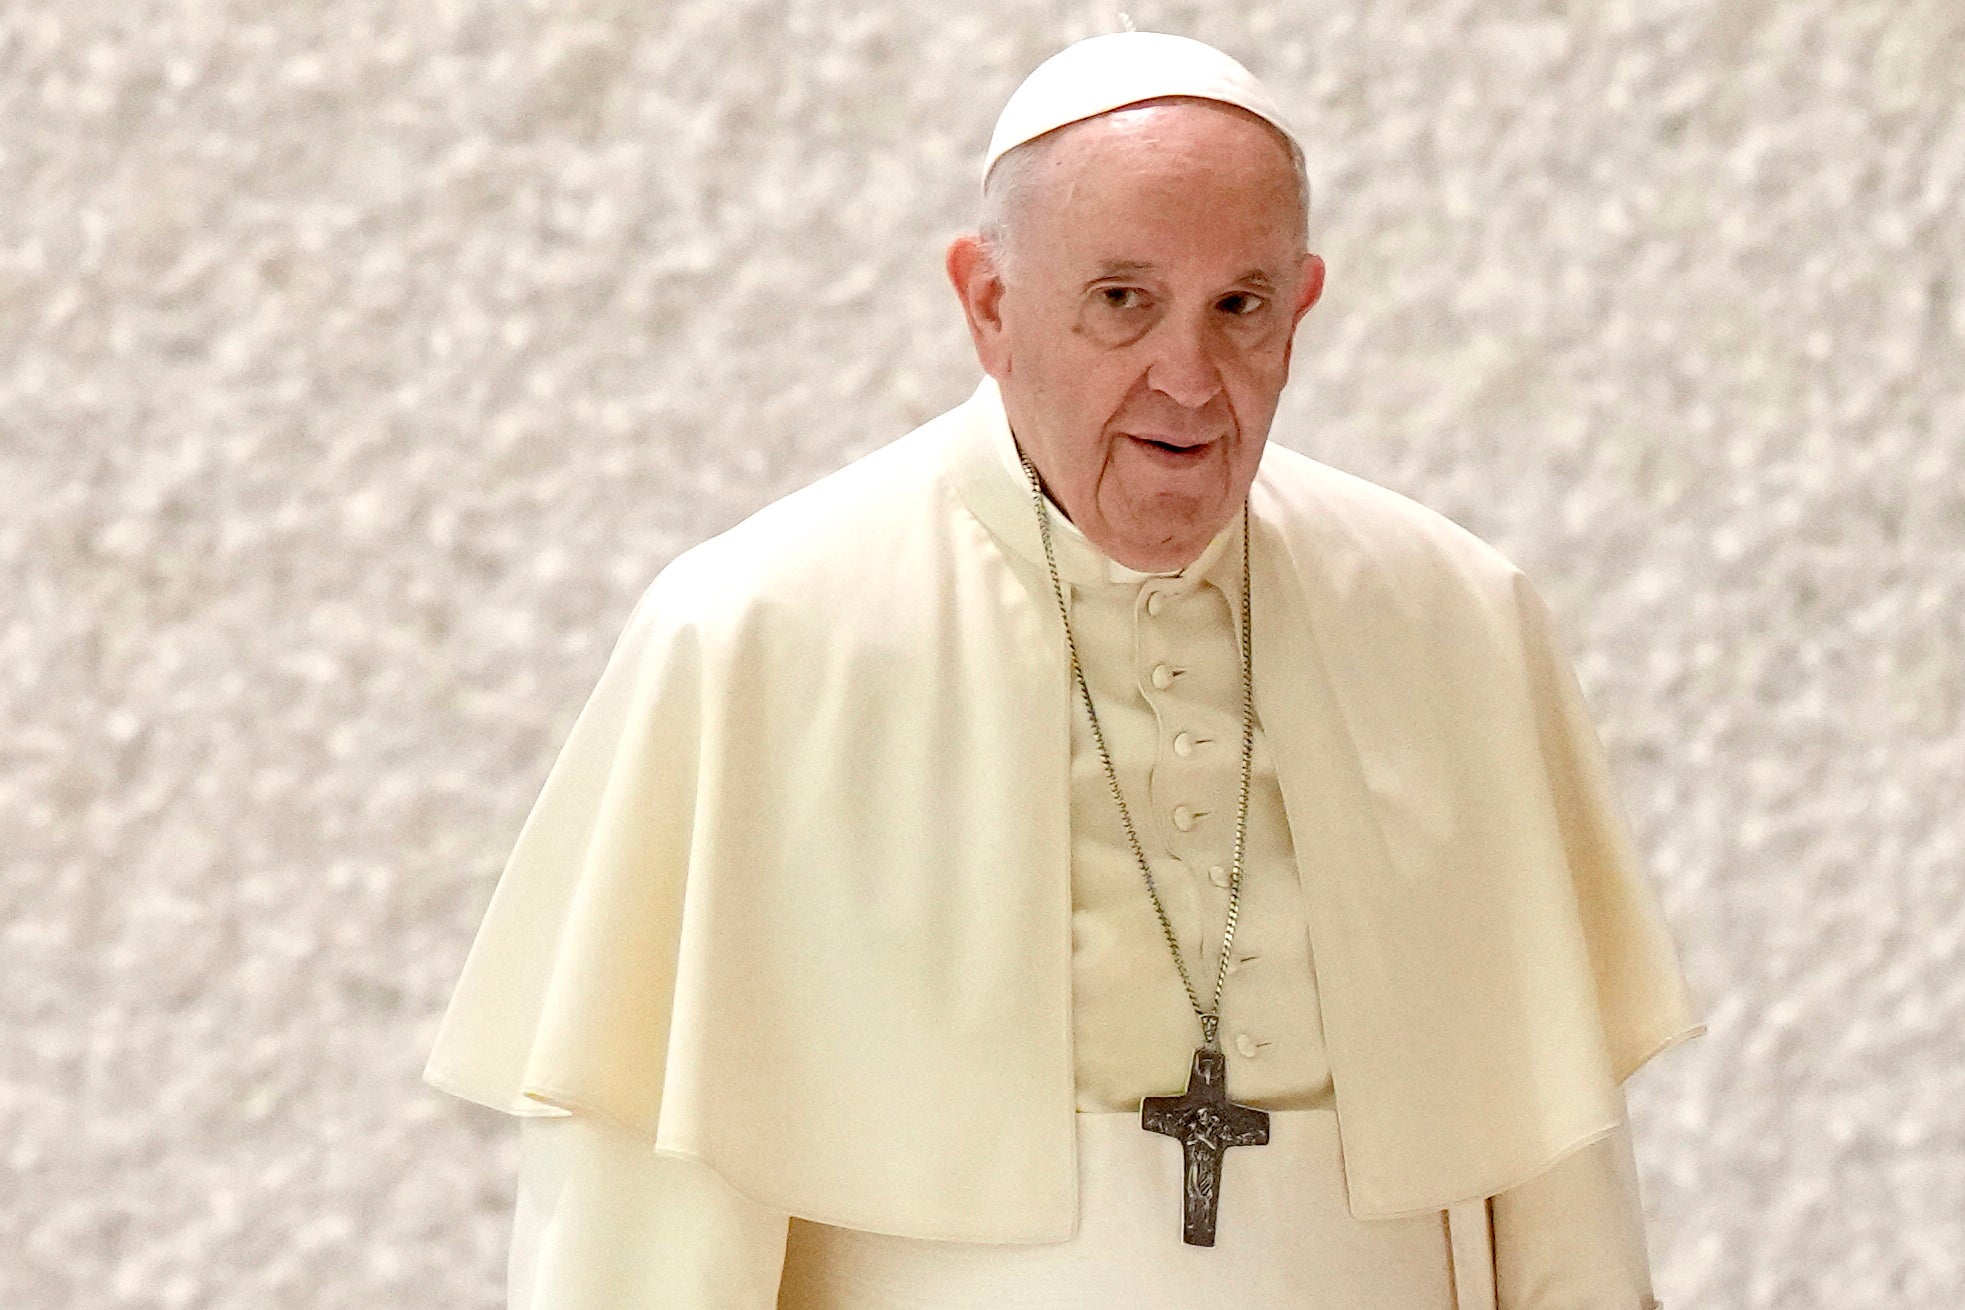 Pope Francis will meet with US President Joe Biden later